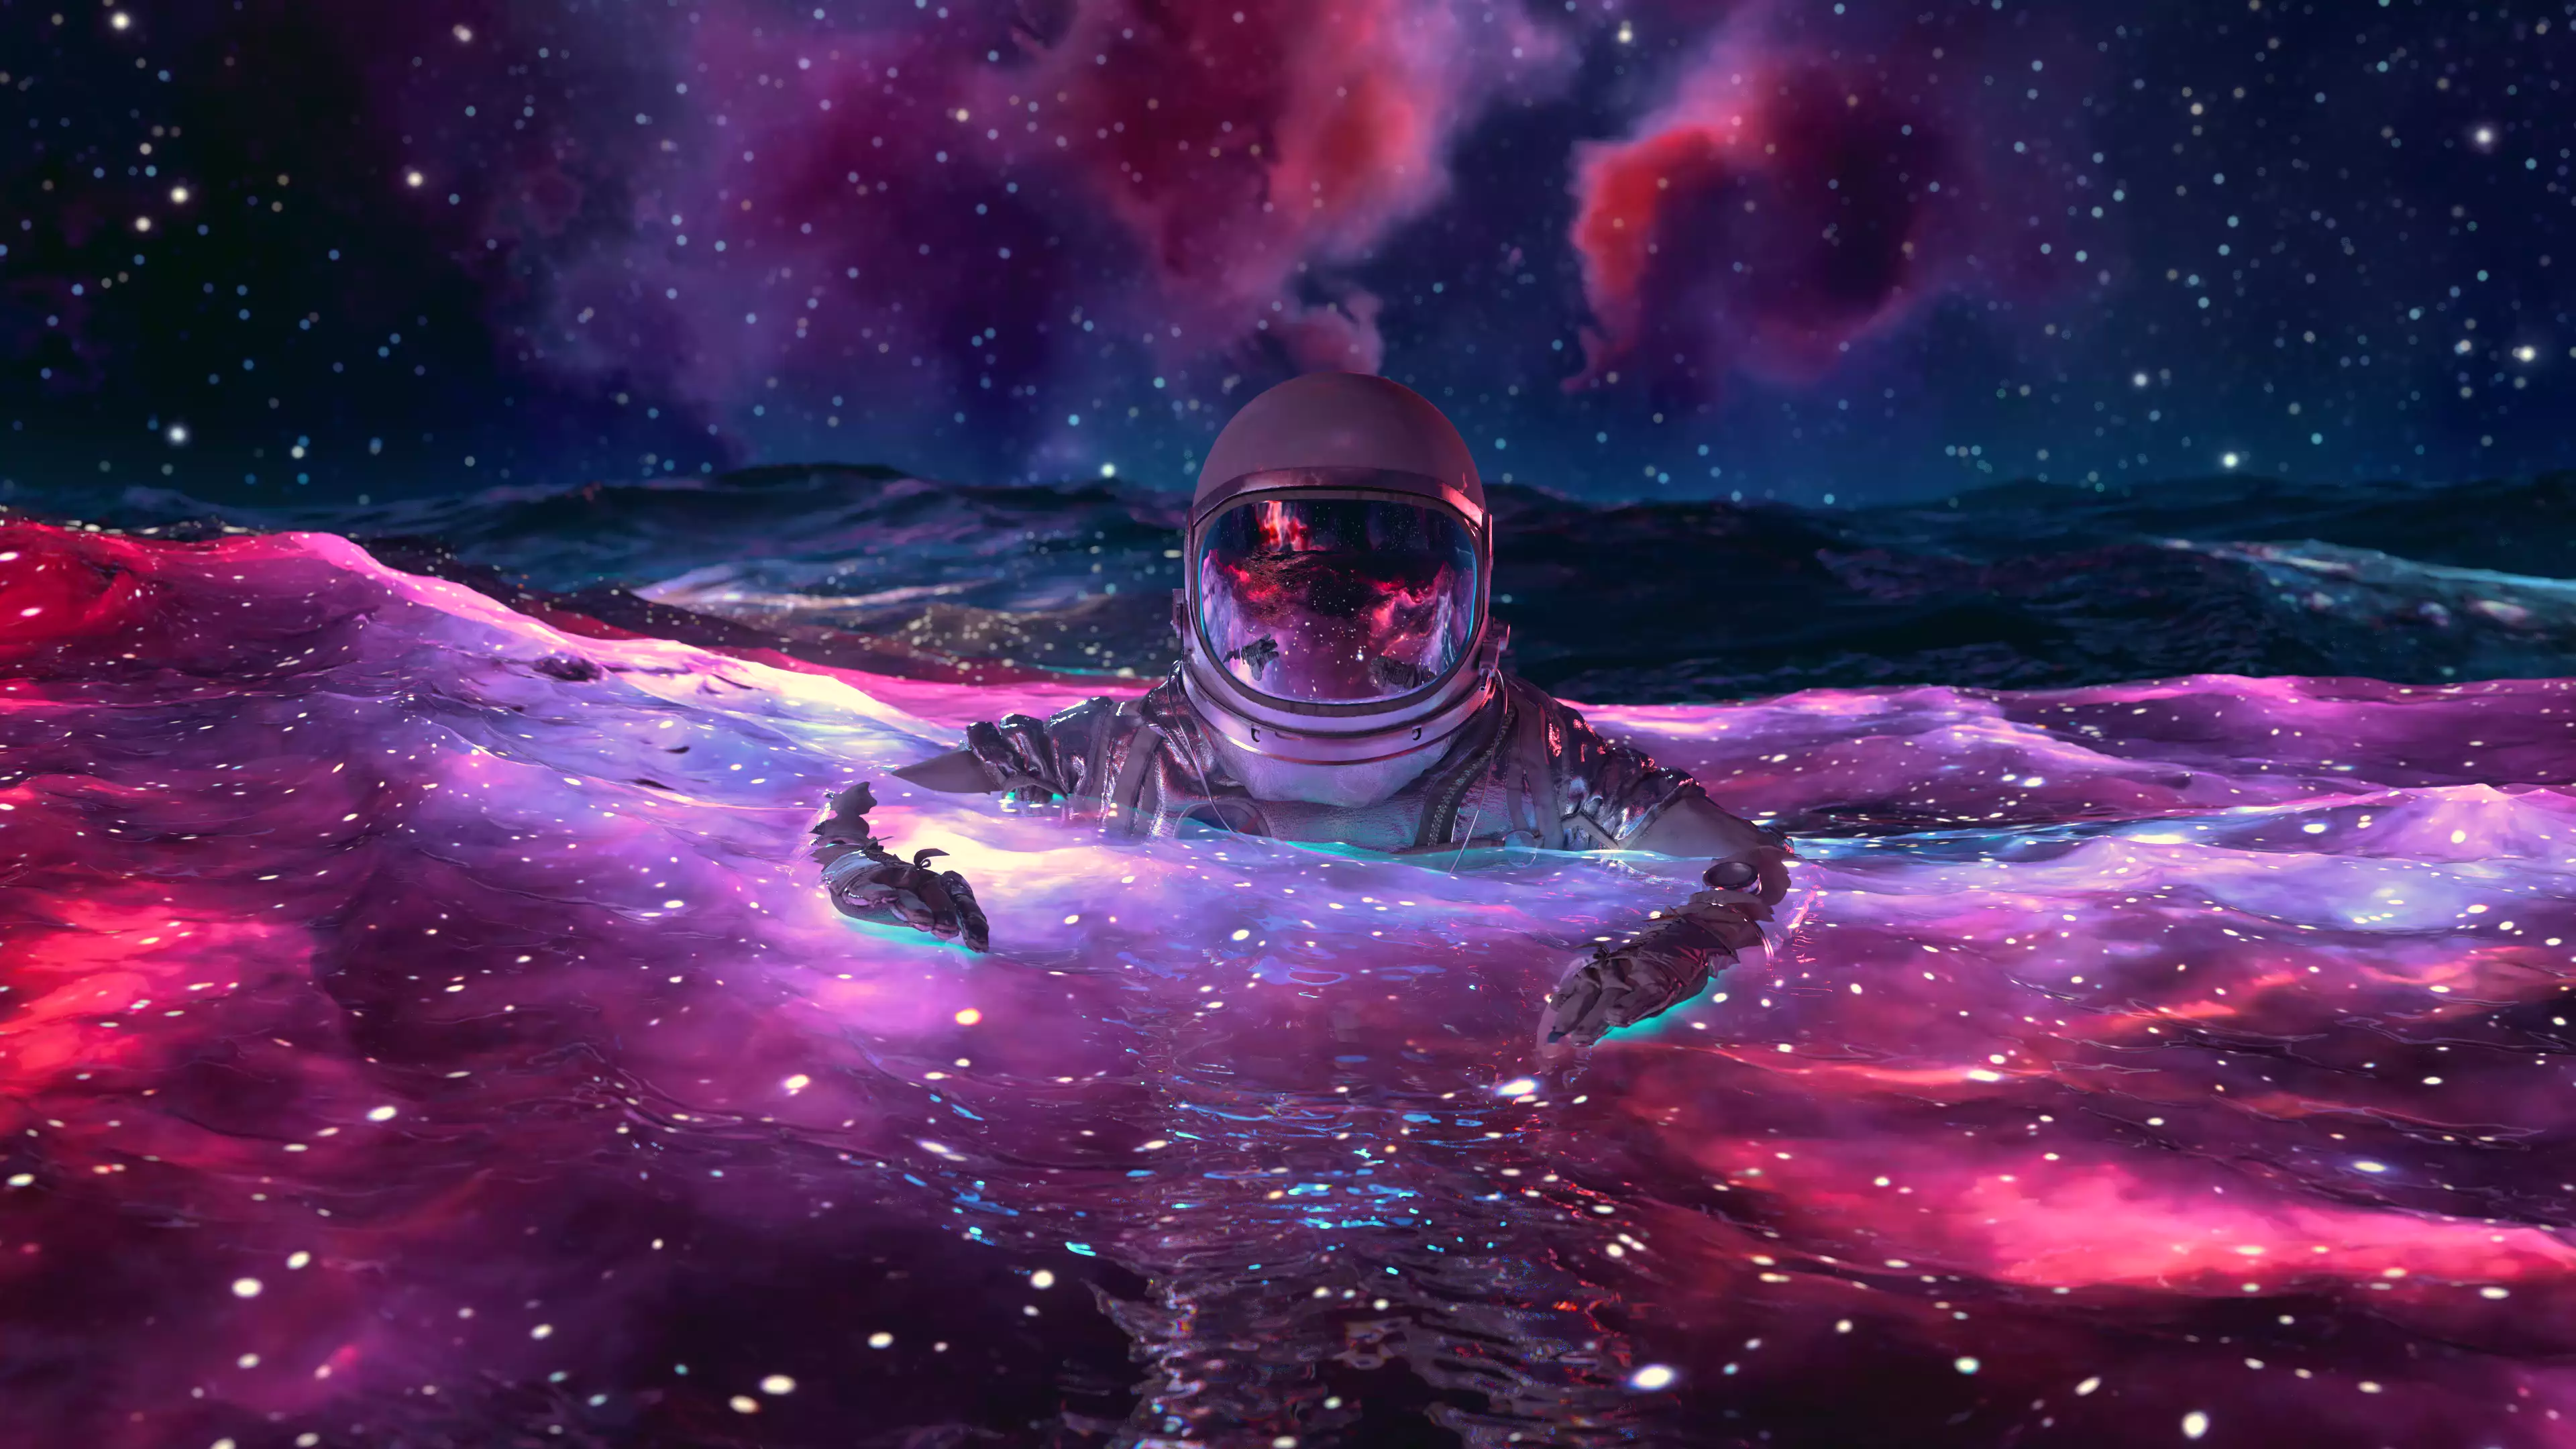 This one space. Floating in Space by visualdon. Космос. Космос арт. Космос арты.